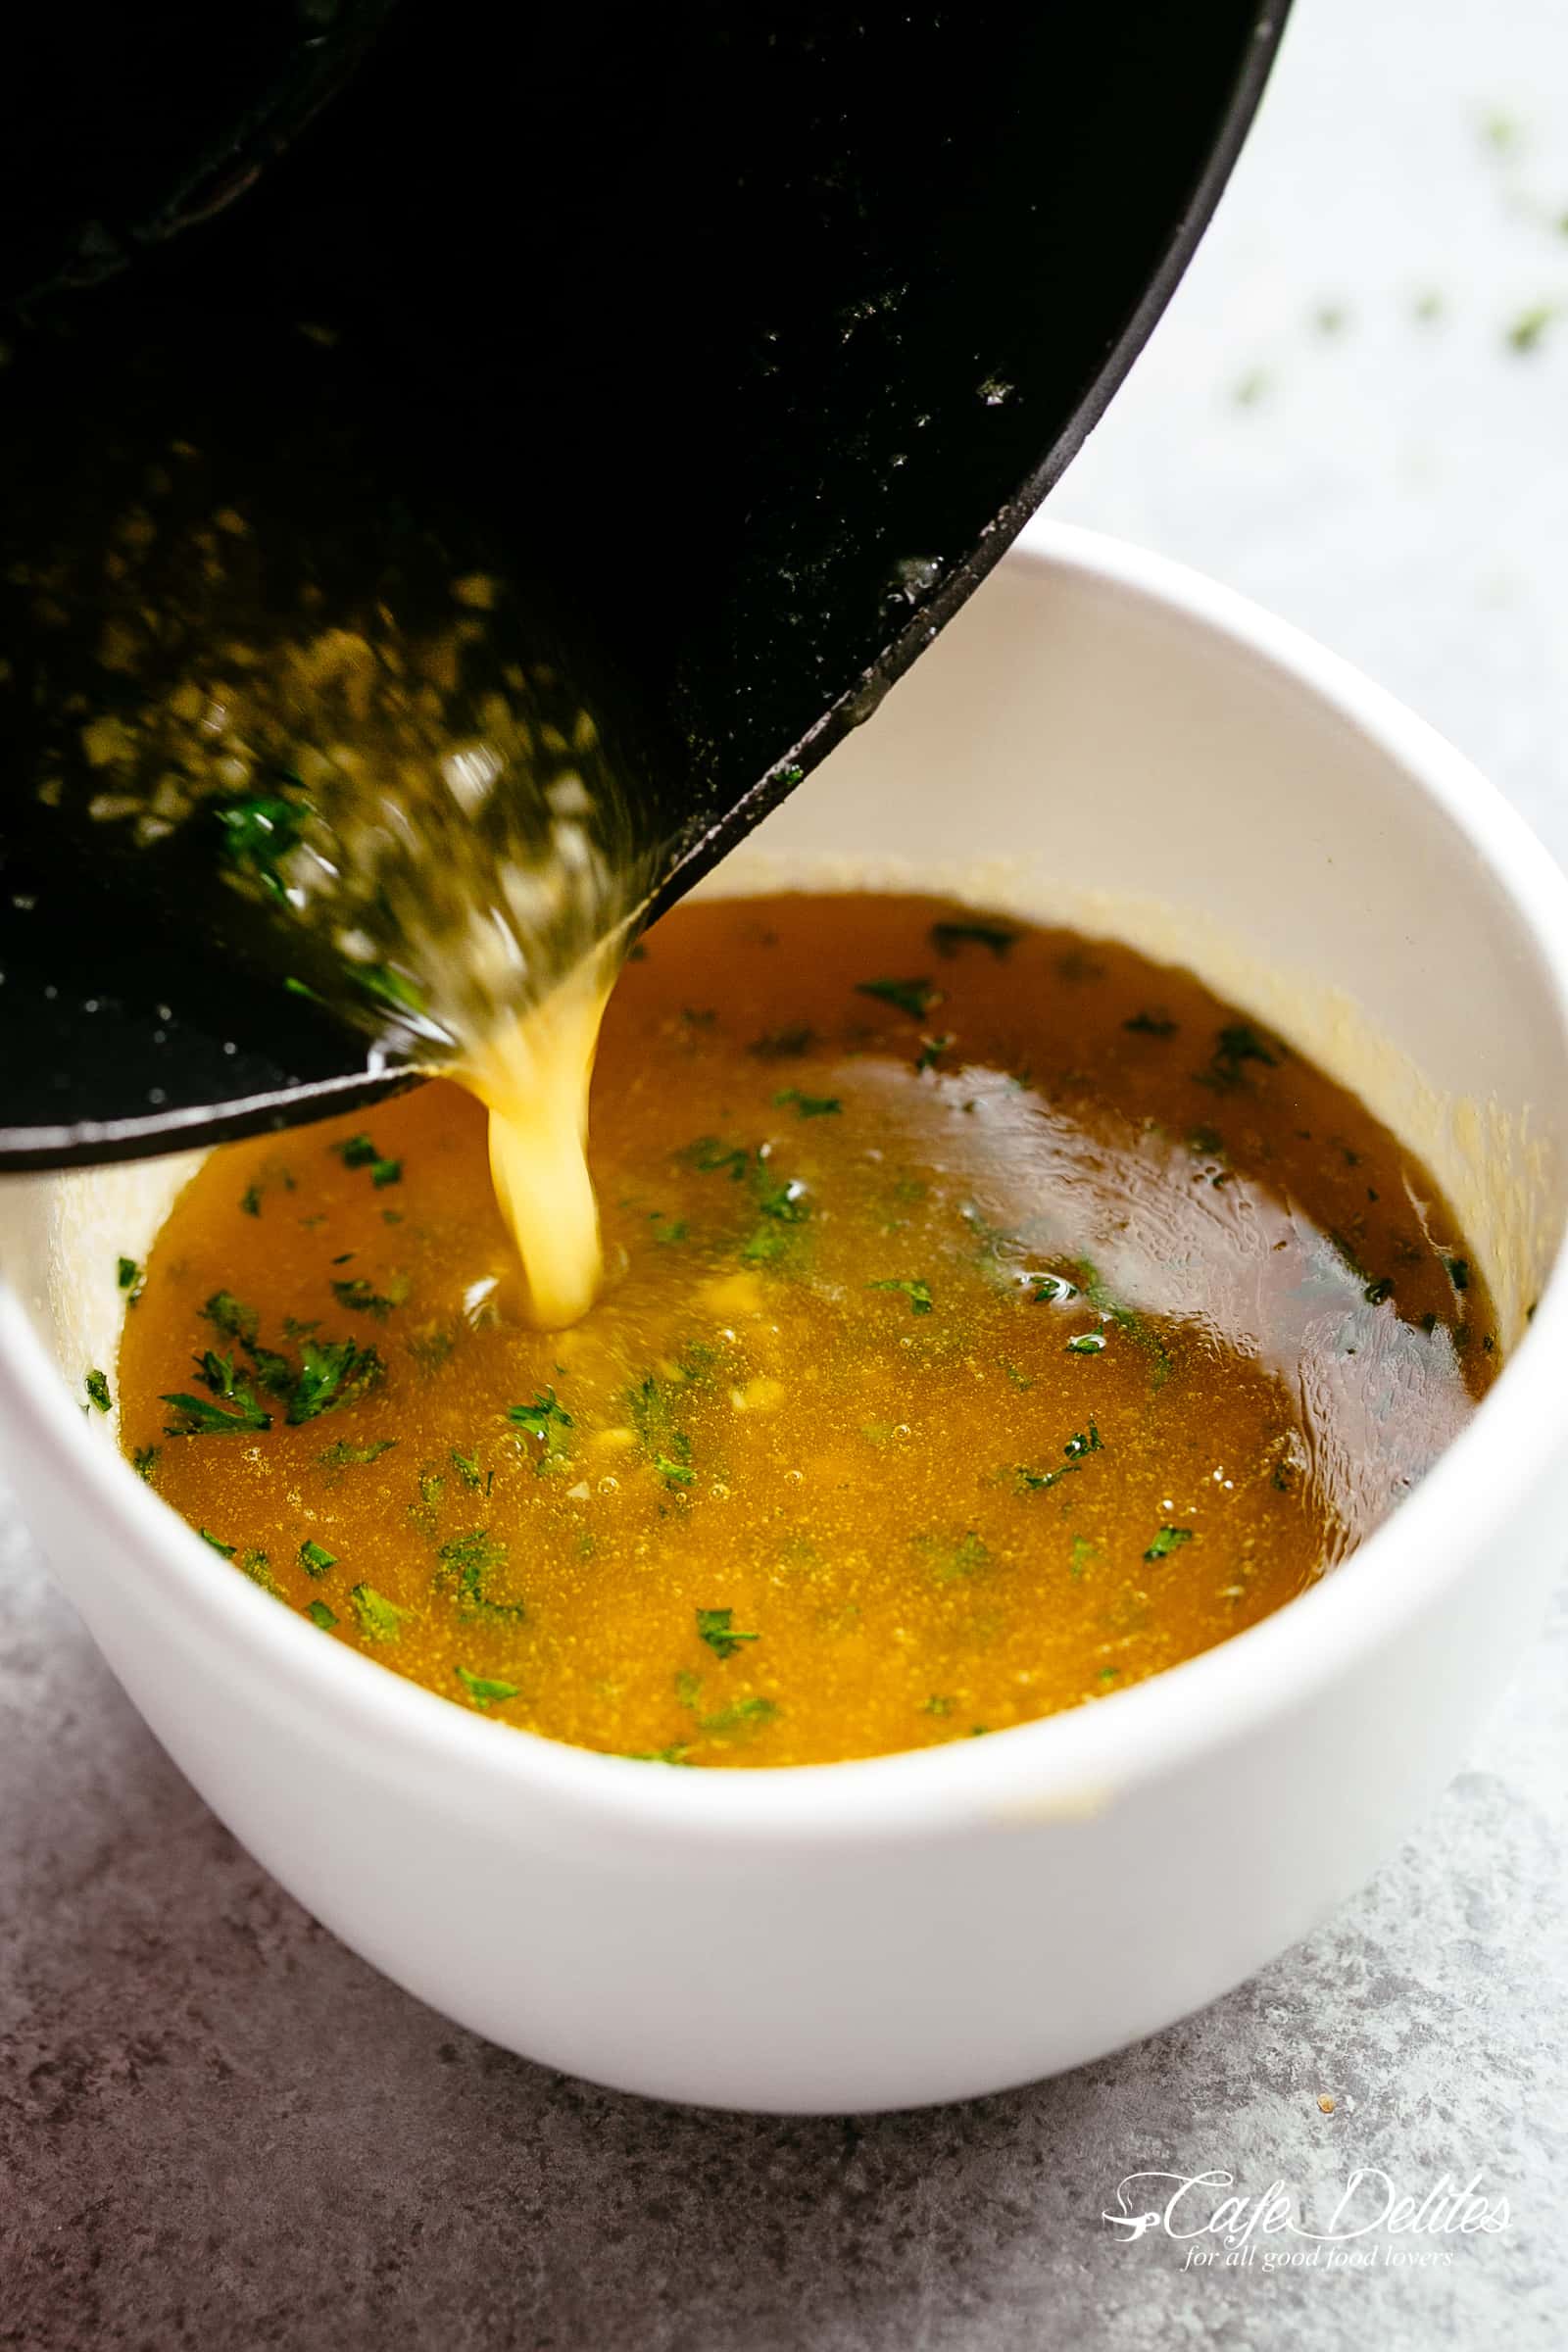 The most amazing 5-ingredient Honey Garlic Butter sauce ready in minutes with only a few simple ingredients! So fast, EASY to make and versatile! Pair it with anything! | cafedelites.com